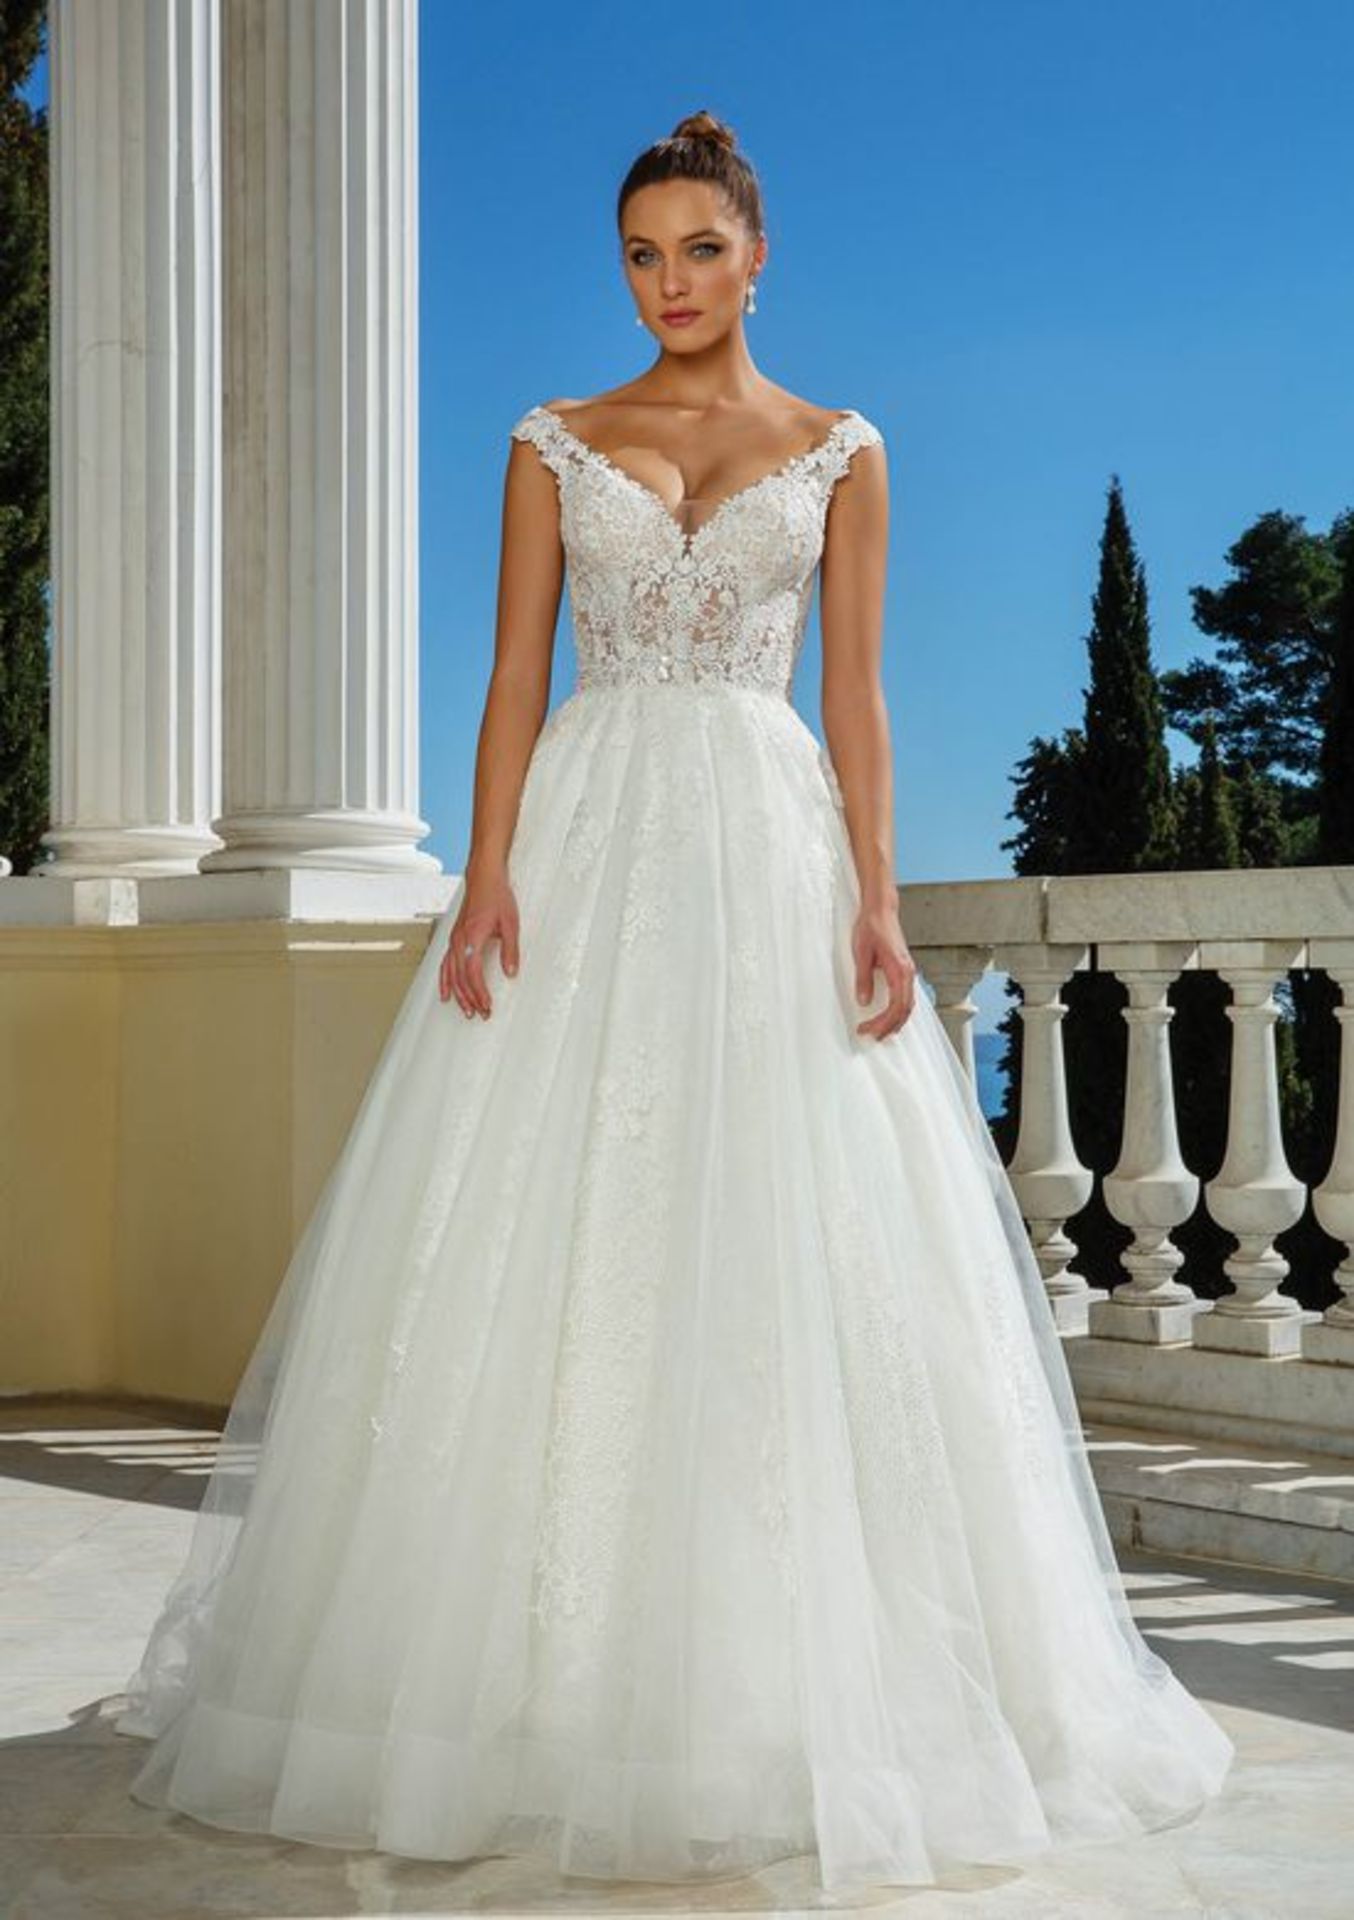 1 x Justin Alexander V-Neck Bridal Ball Gown With Illusion Bodice - UK Size 12 - RRP £1,340 - Image 4 of 6